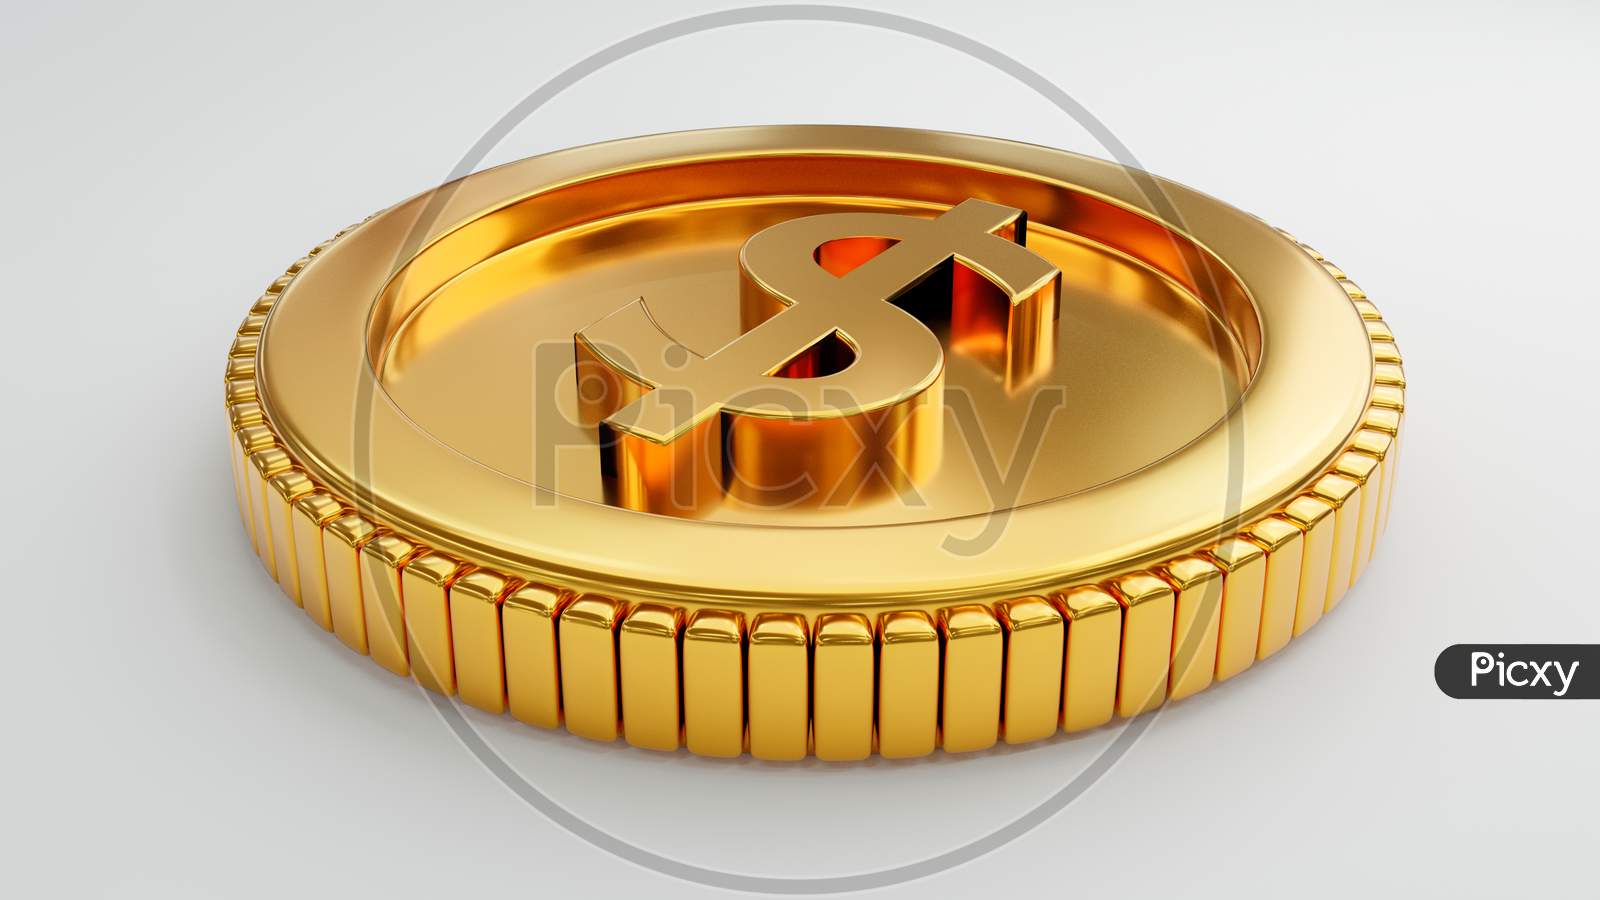 Gold Coin With Us Dollar Sign On Isolated White Background. Money Economic And Business Investment Concept. 3D Illustration Rendering